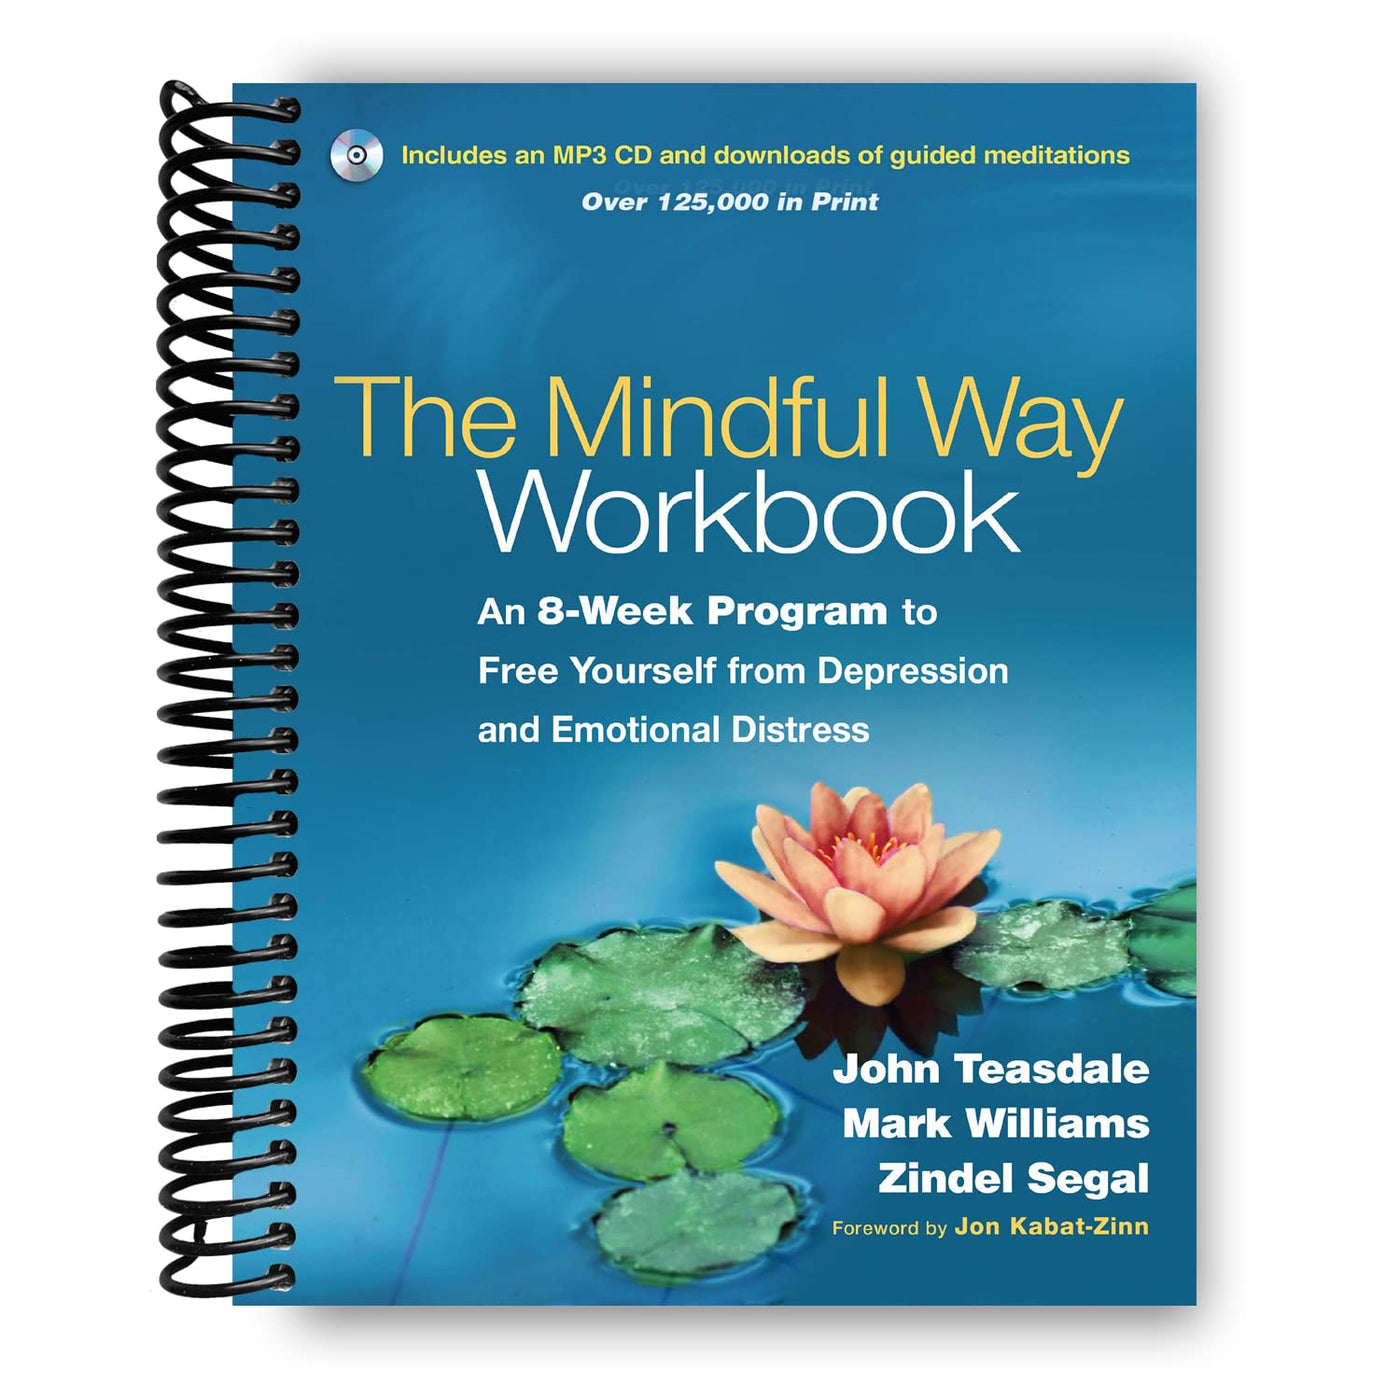 The Mindful Way Workbook: An 8-Week Program to Free Yourself from Depression and Emotional Distress (Spiral Bound)